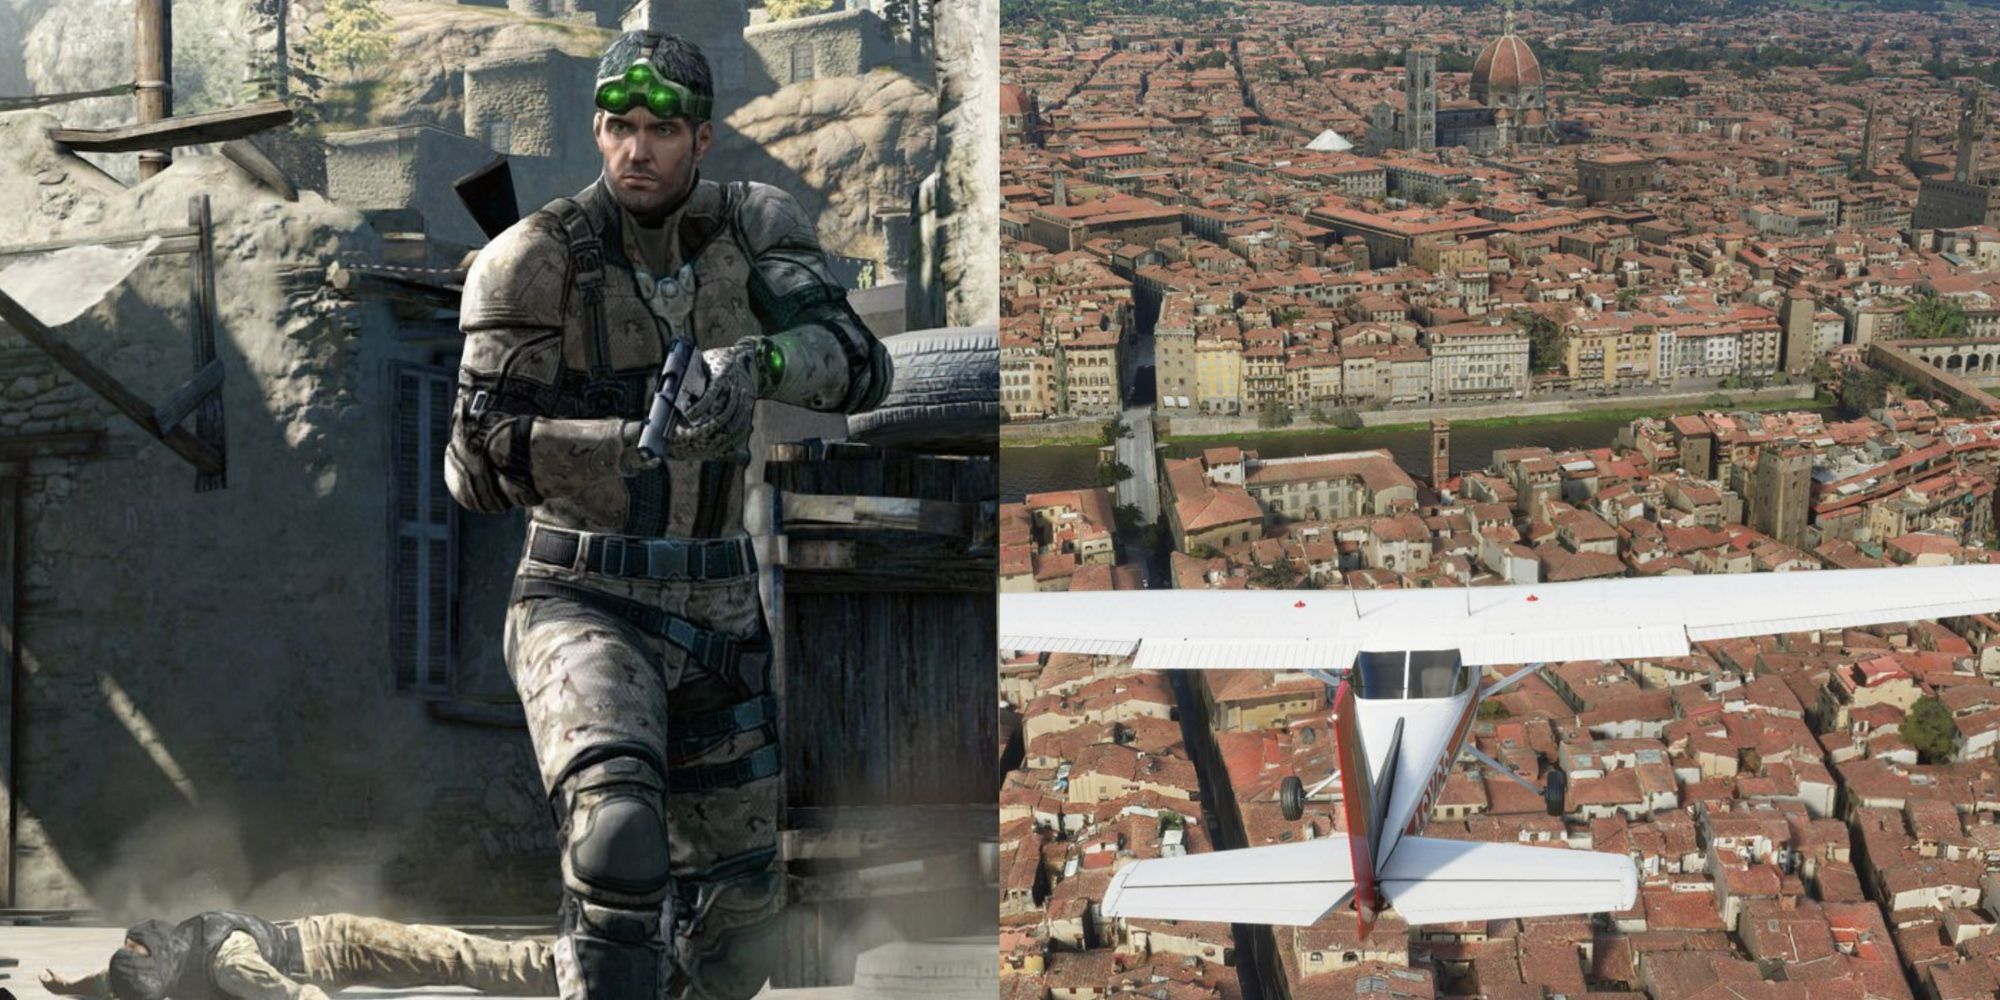 Games That Take You Around The World Featured Split Image Splinter Cell and Microsoft Flight Simulator